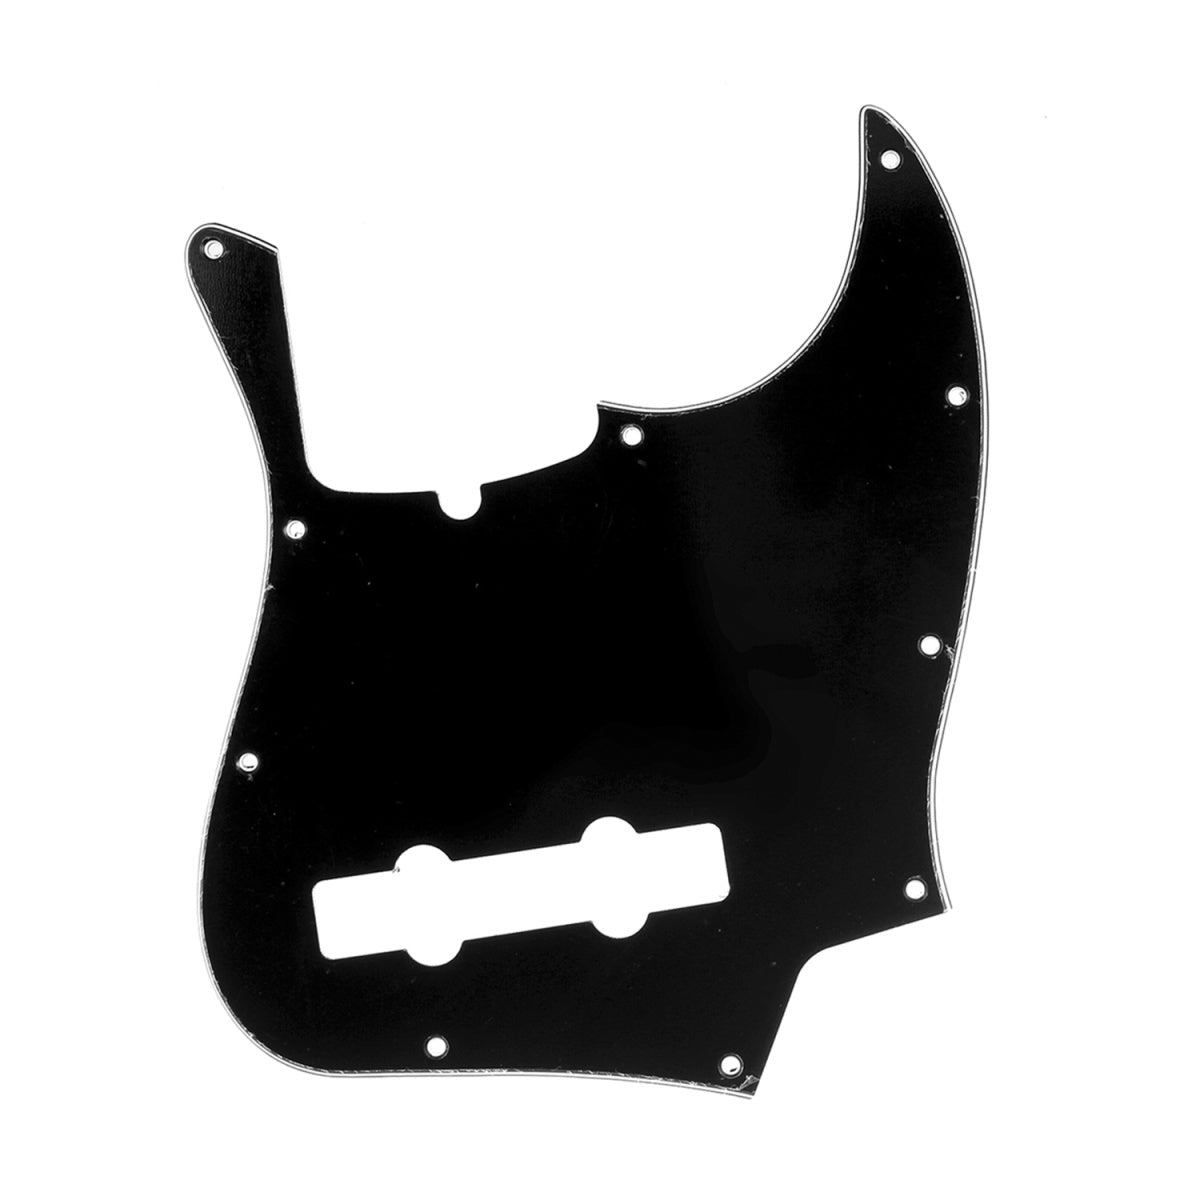 Musiclily Pro 10-Hole Contemporary J Bass Pickguard for Fender Jazz Bass American 5-String, 3Ply Black